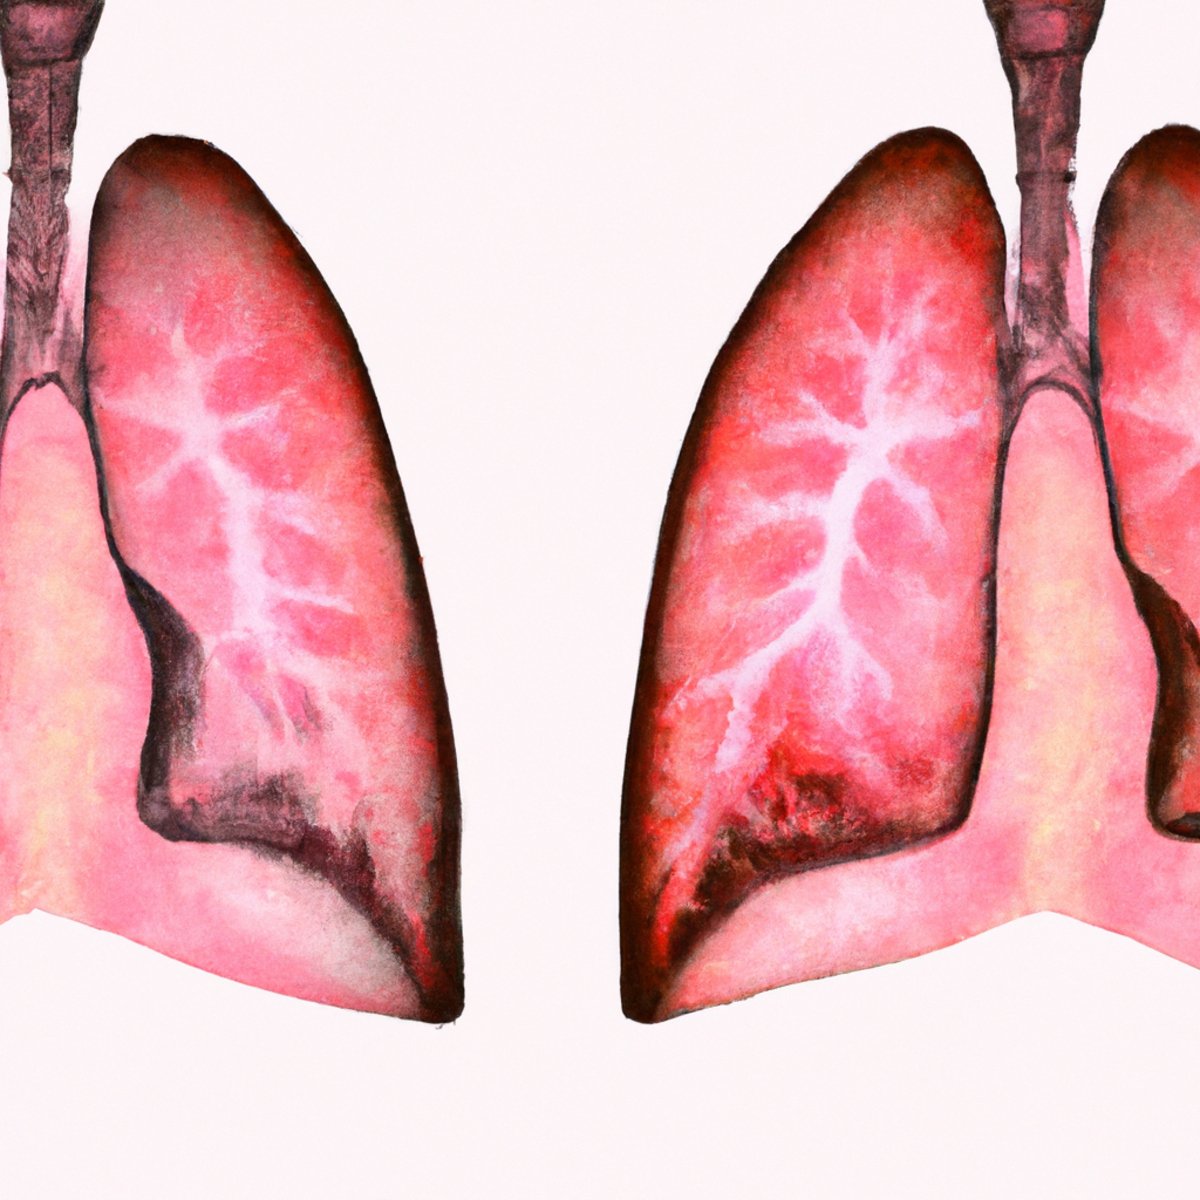 Close-up of healthy pink lung and damaged grey lung with Desquamative Interstitial Pneumonia (DIP).